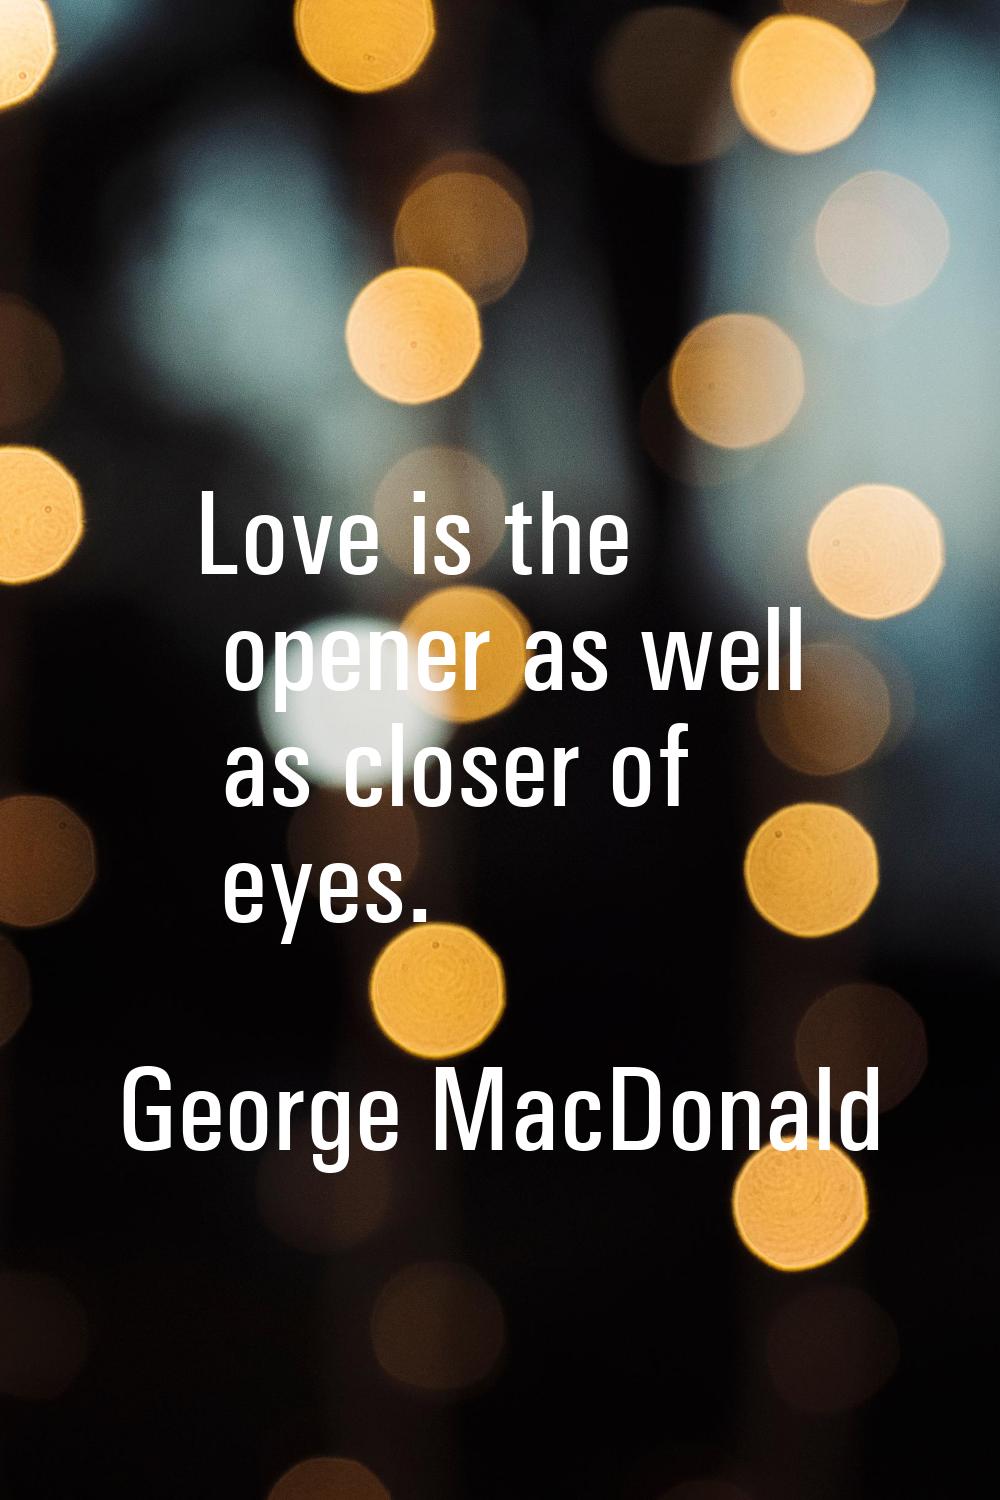 Love is the opener as well as closer of eyes.